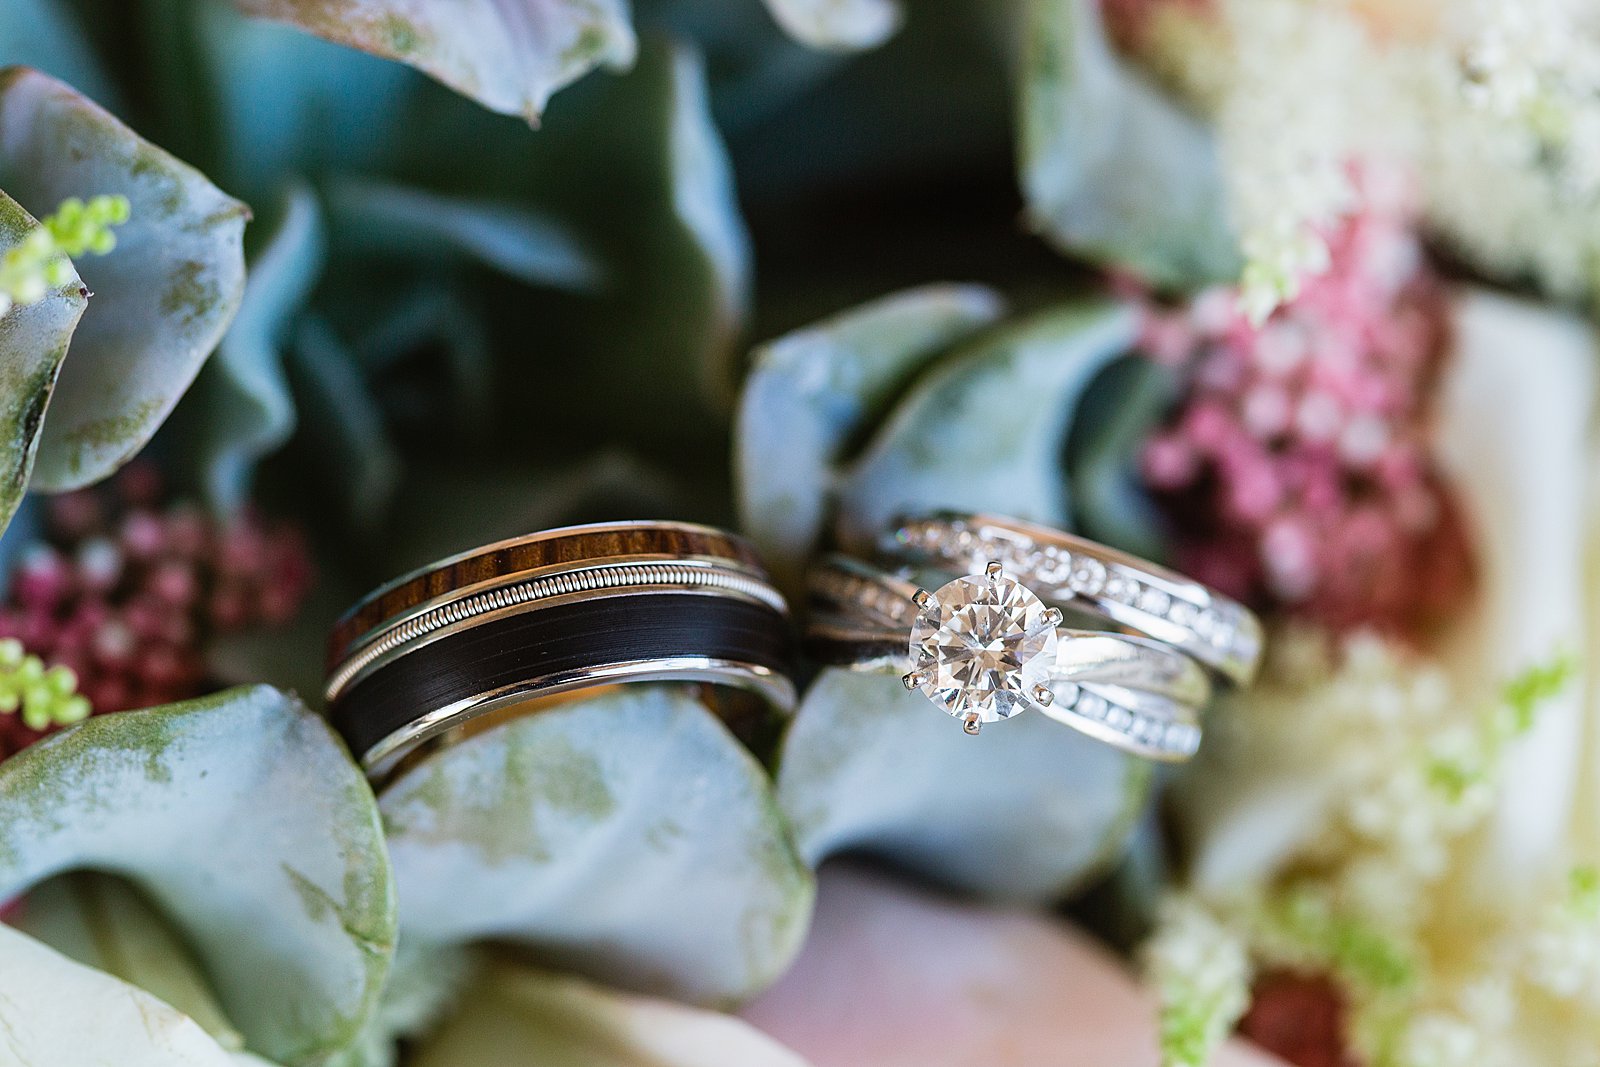 Bride and groom's simple unique wedding bands by PMA Photography.